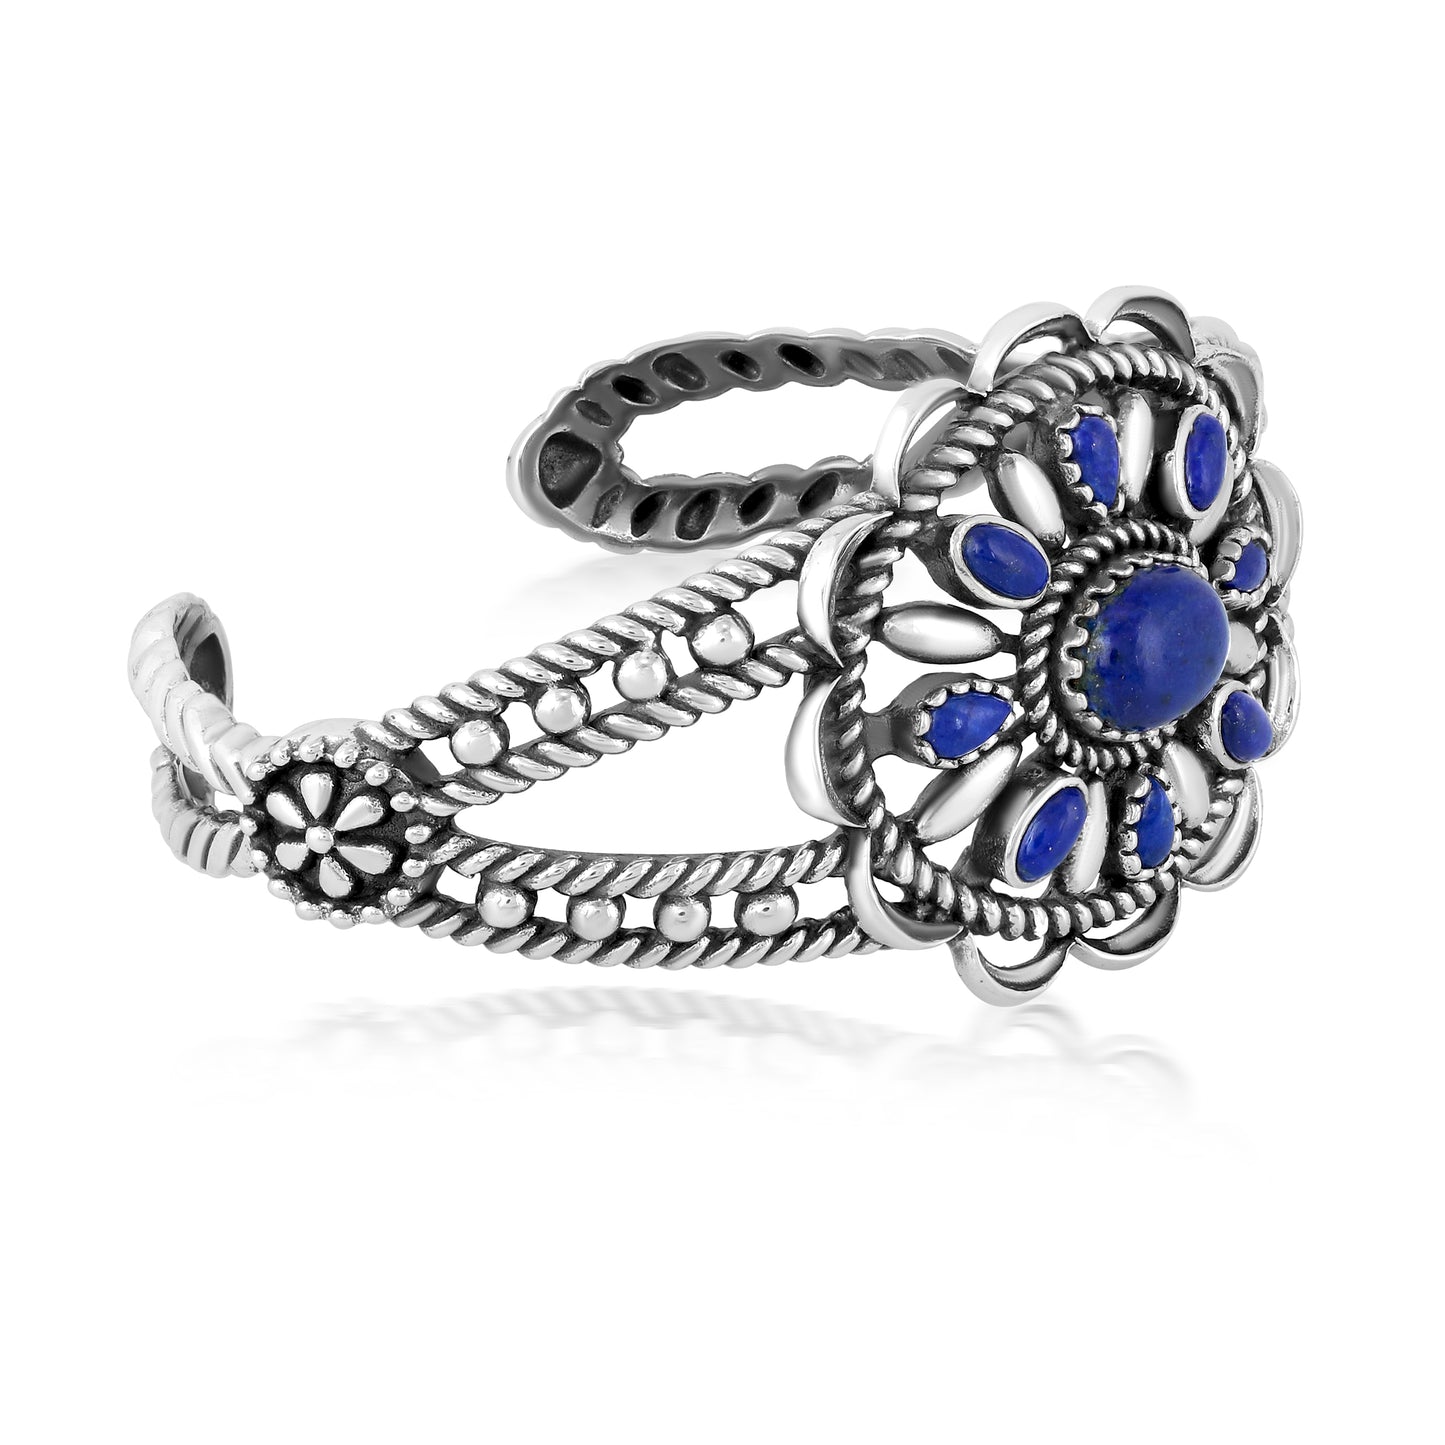 Southwestern Lapis Wildflower Sterling Silver Rope Cuff Bracelet, Sizes Small - Large